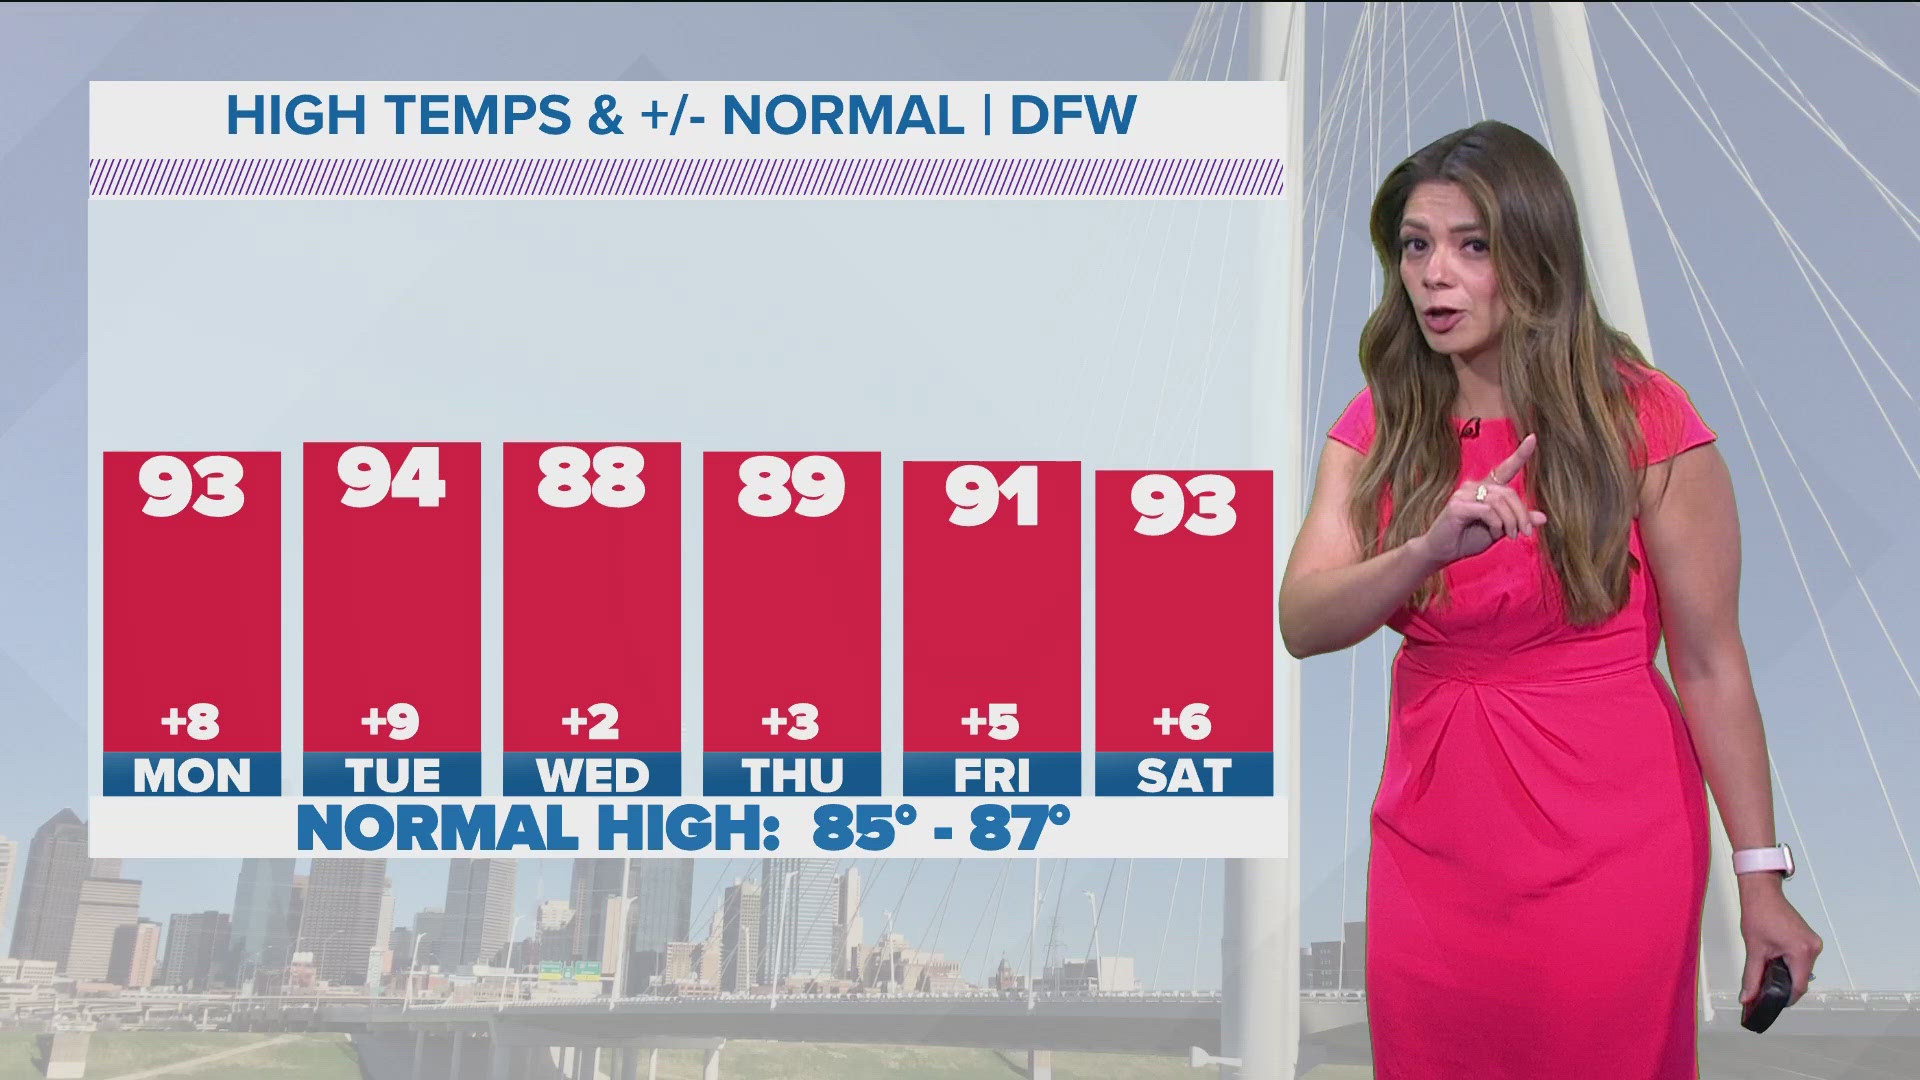 Mariel Ruiz has a look at the weather forecast for this weekend and the warm temps on the way.